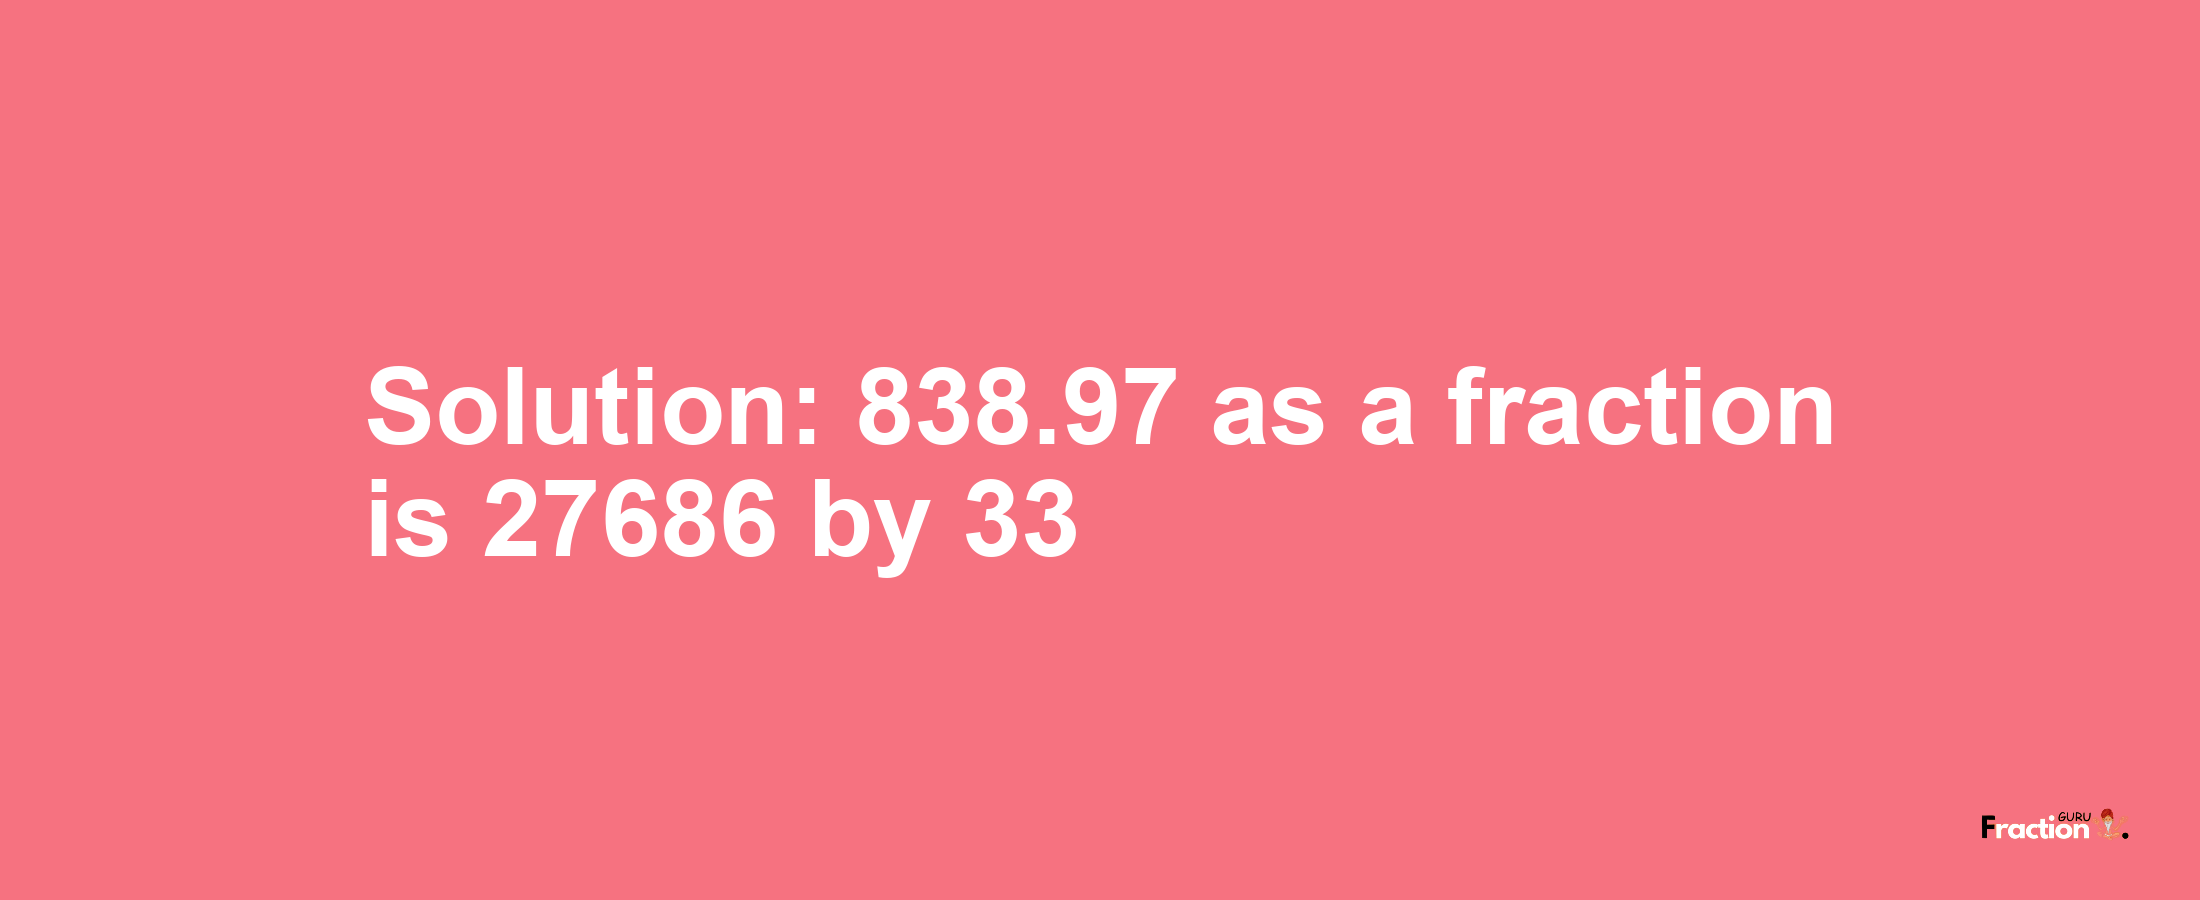 Solution:838.97 as a fraction is 27686/33